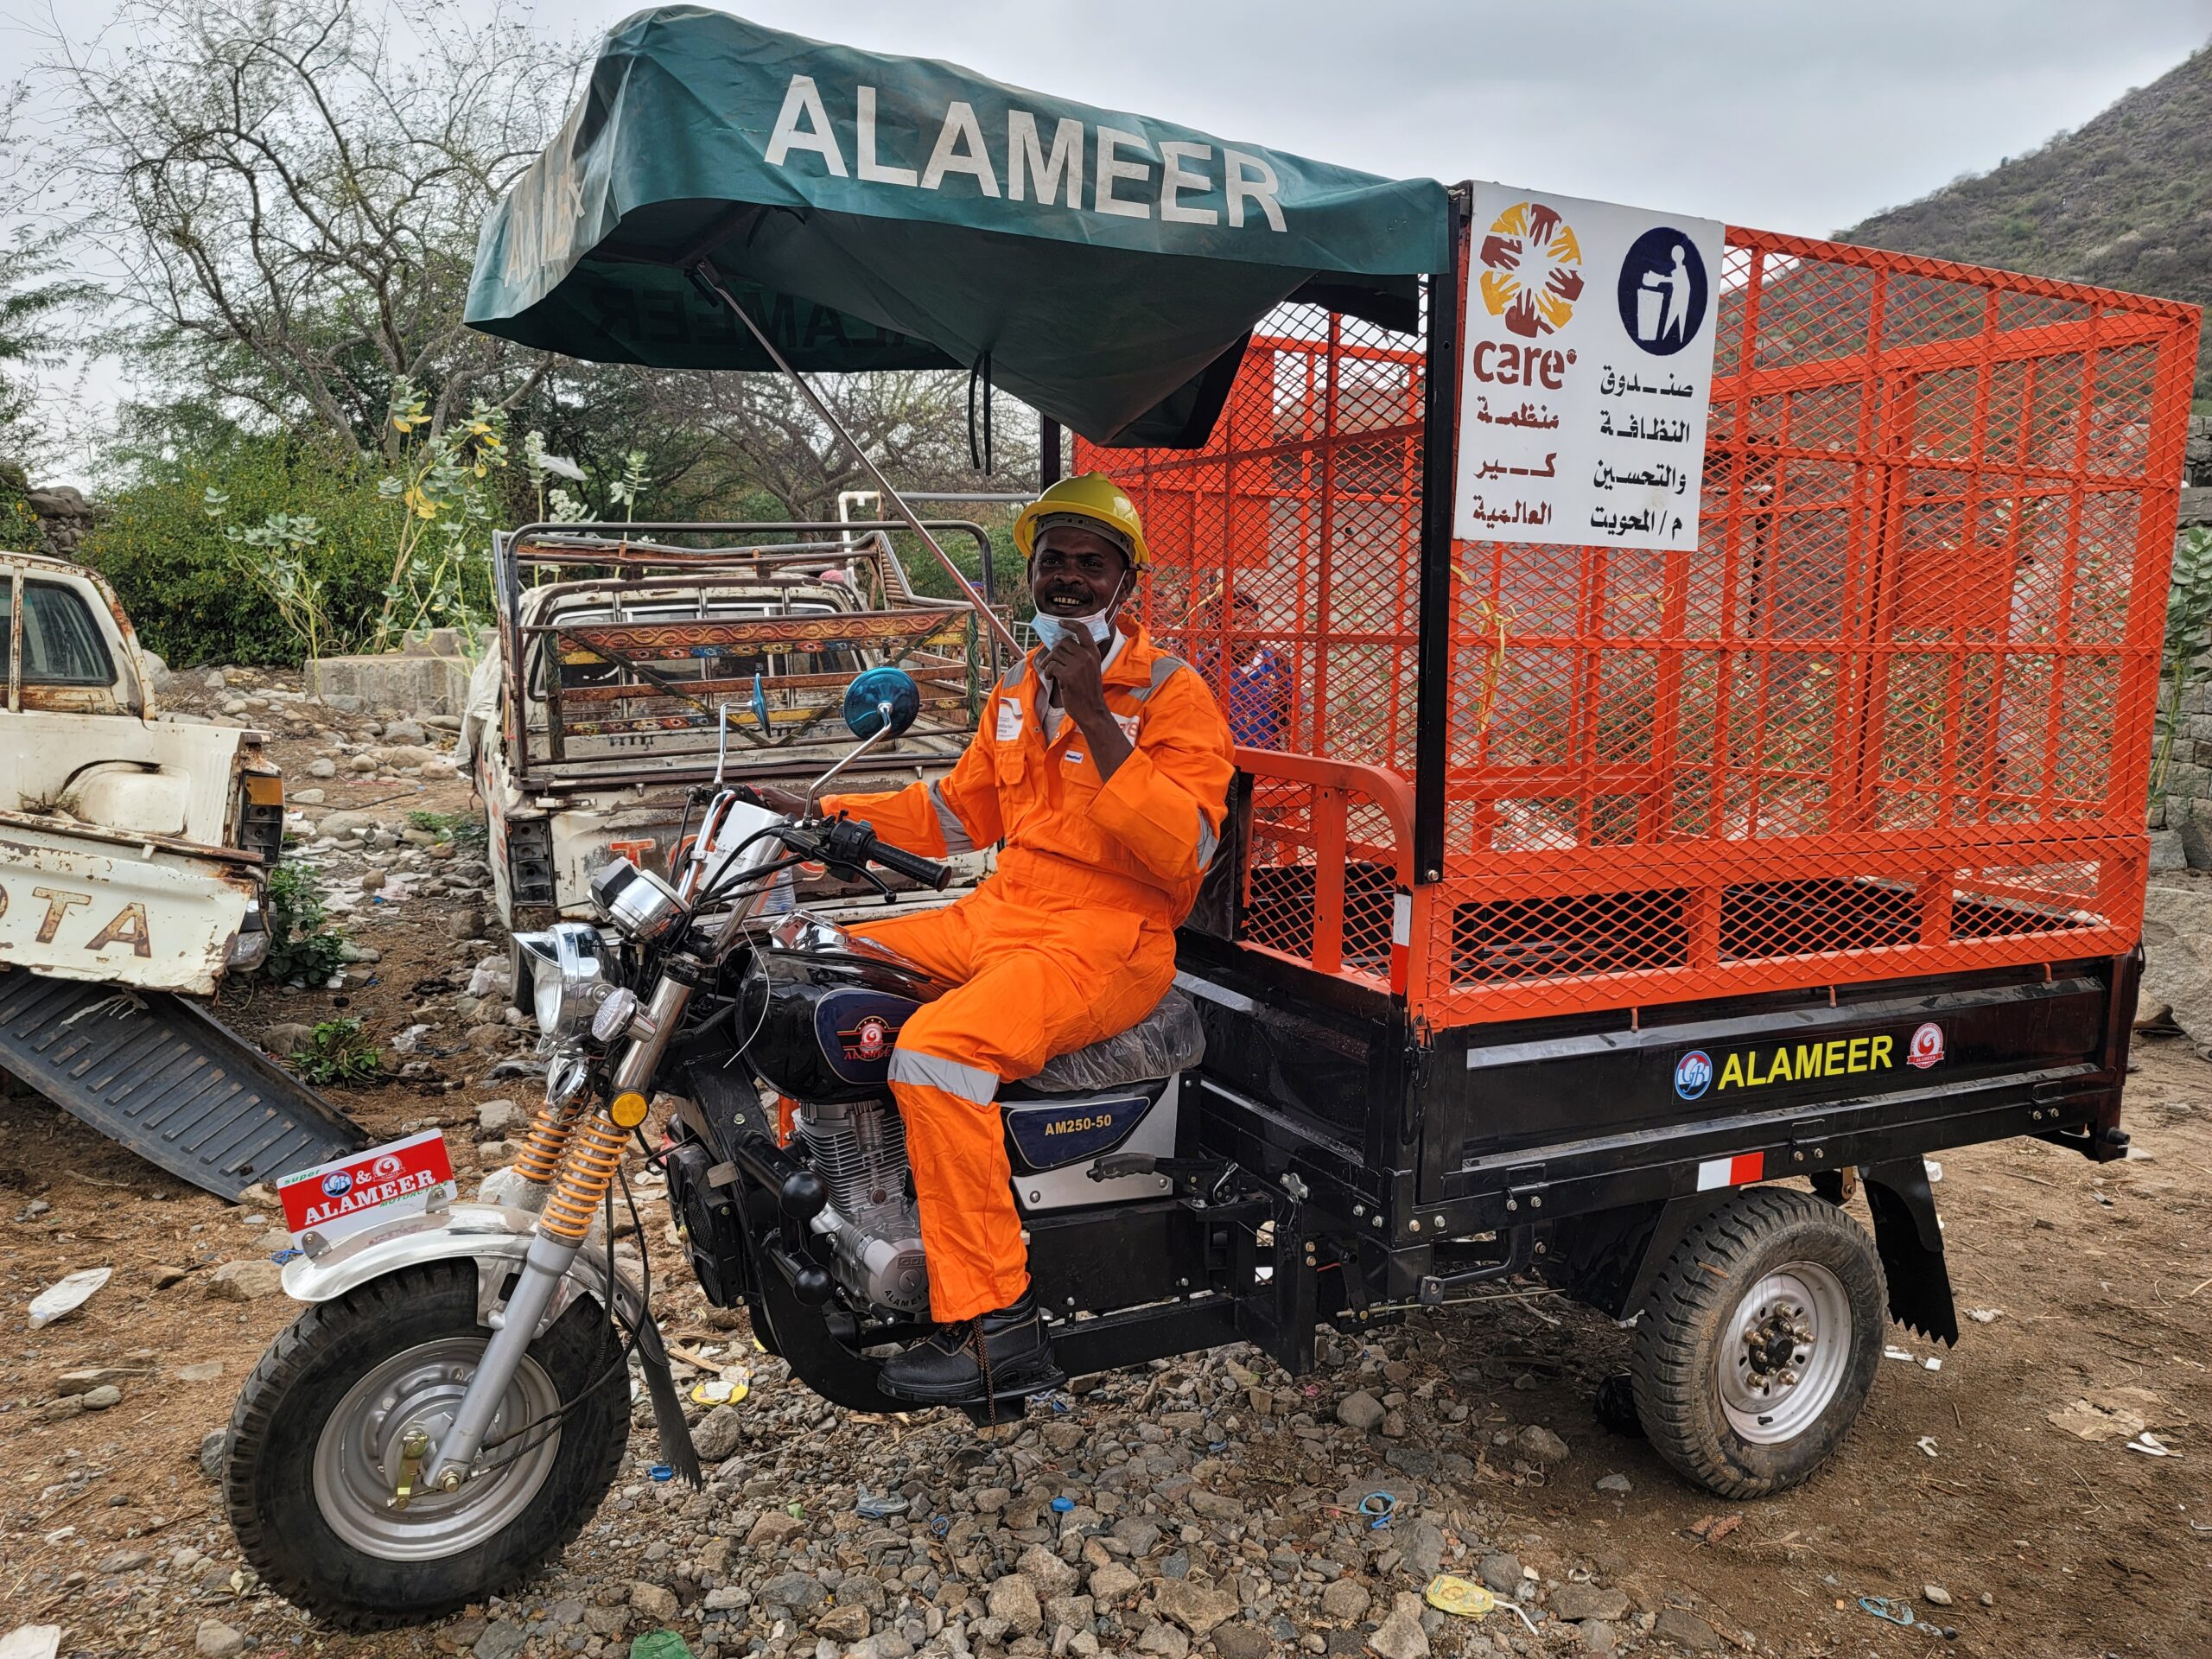 A man in orange overalls sitting on a motorcycle